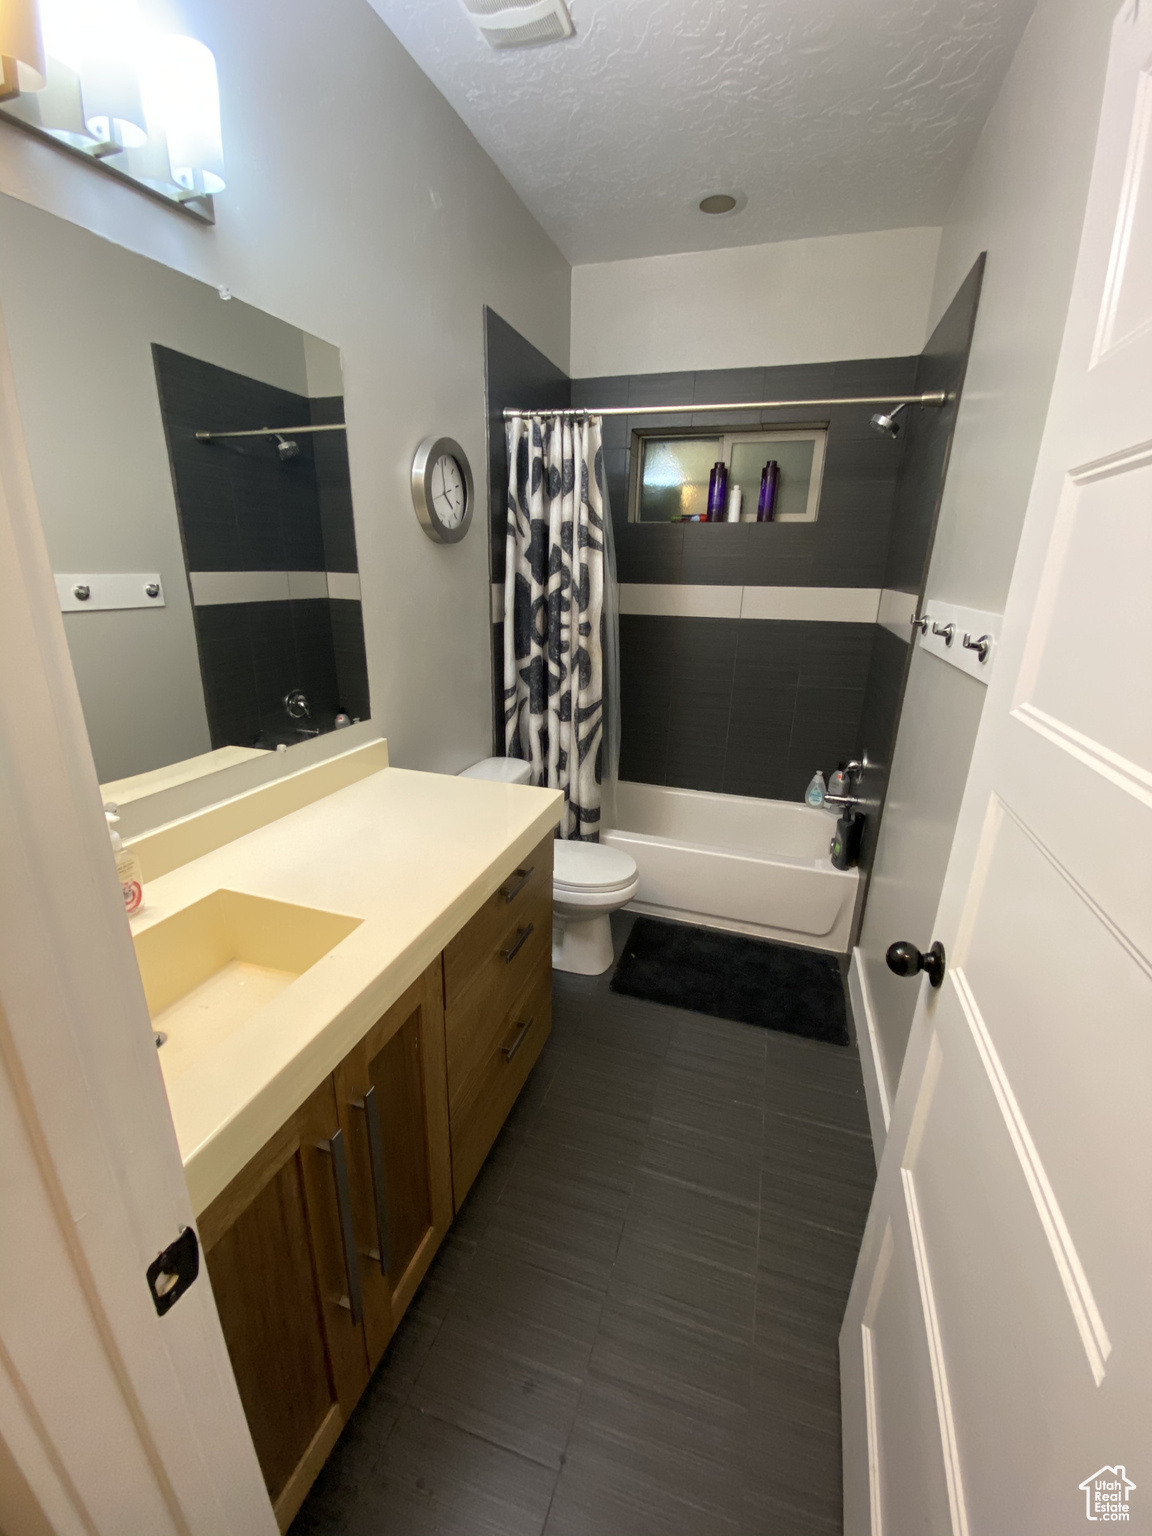 Full bathroom featuring a textured ceiling, vanity, shower / bath combination with curtain, toilet, and tile flooring